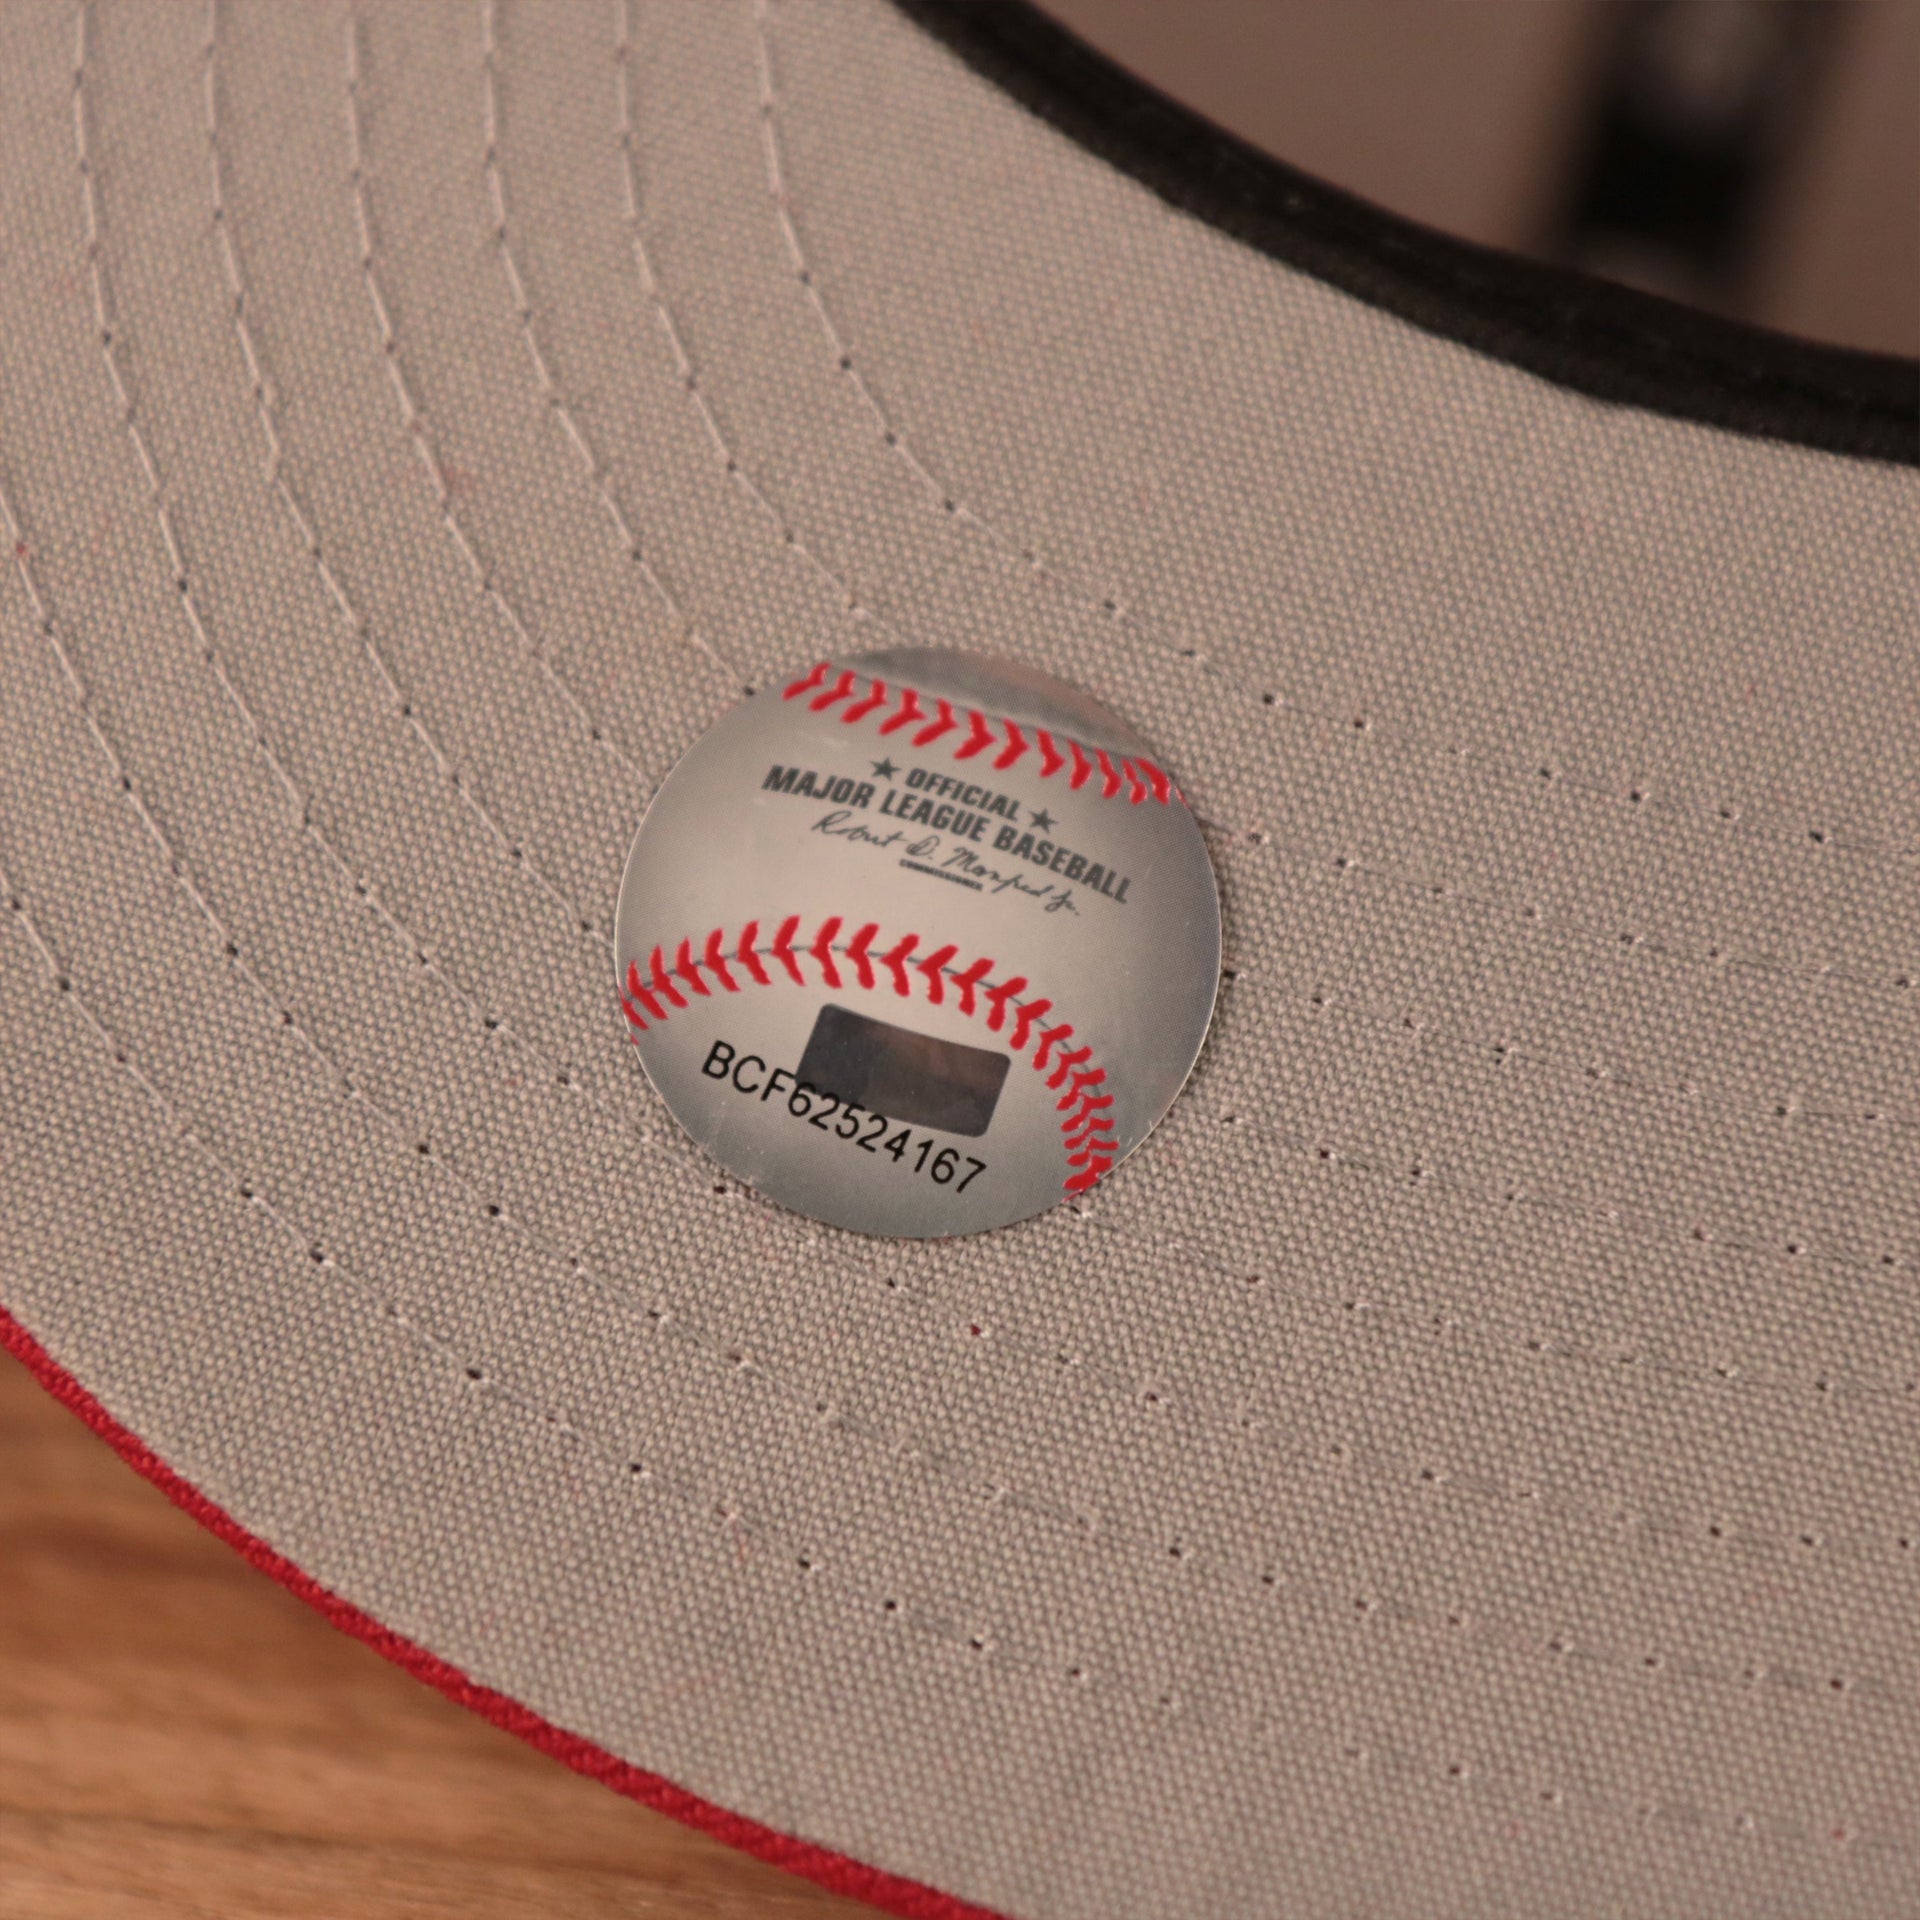 The official Major League Baseball logo sticker on the gray underbrim of the red all over patch fitted New Era cap.